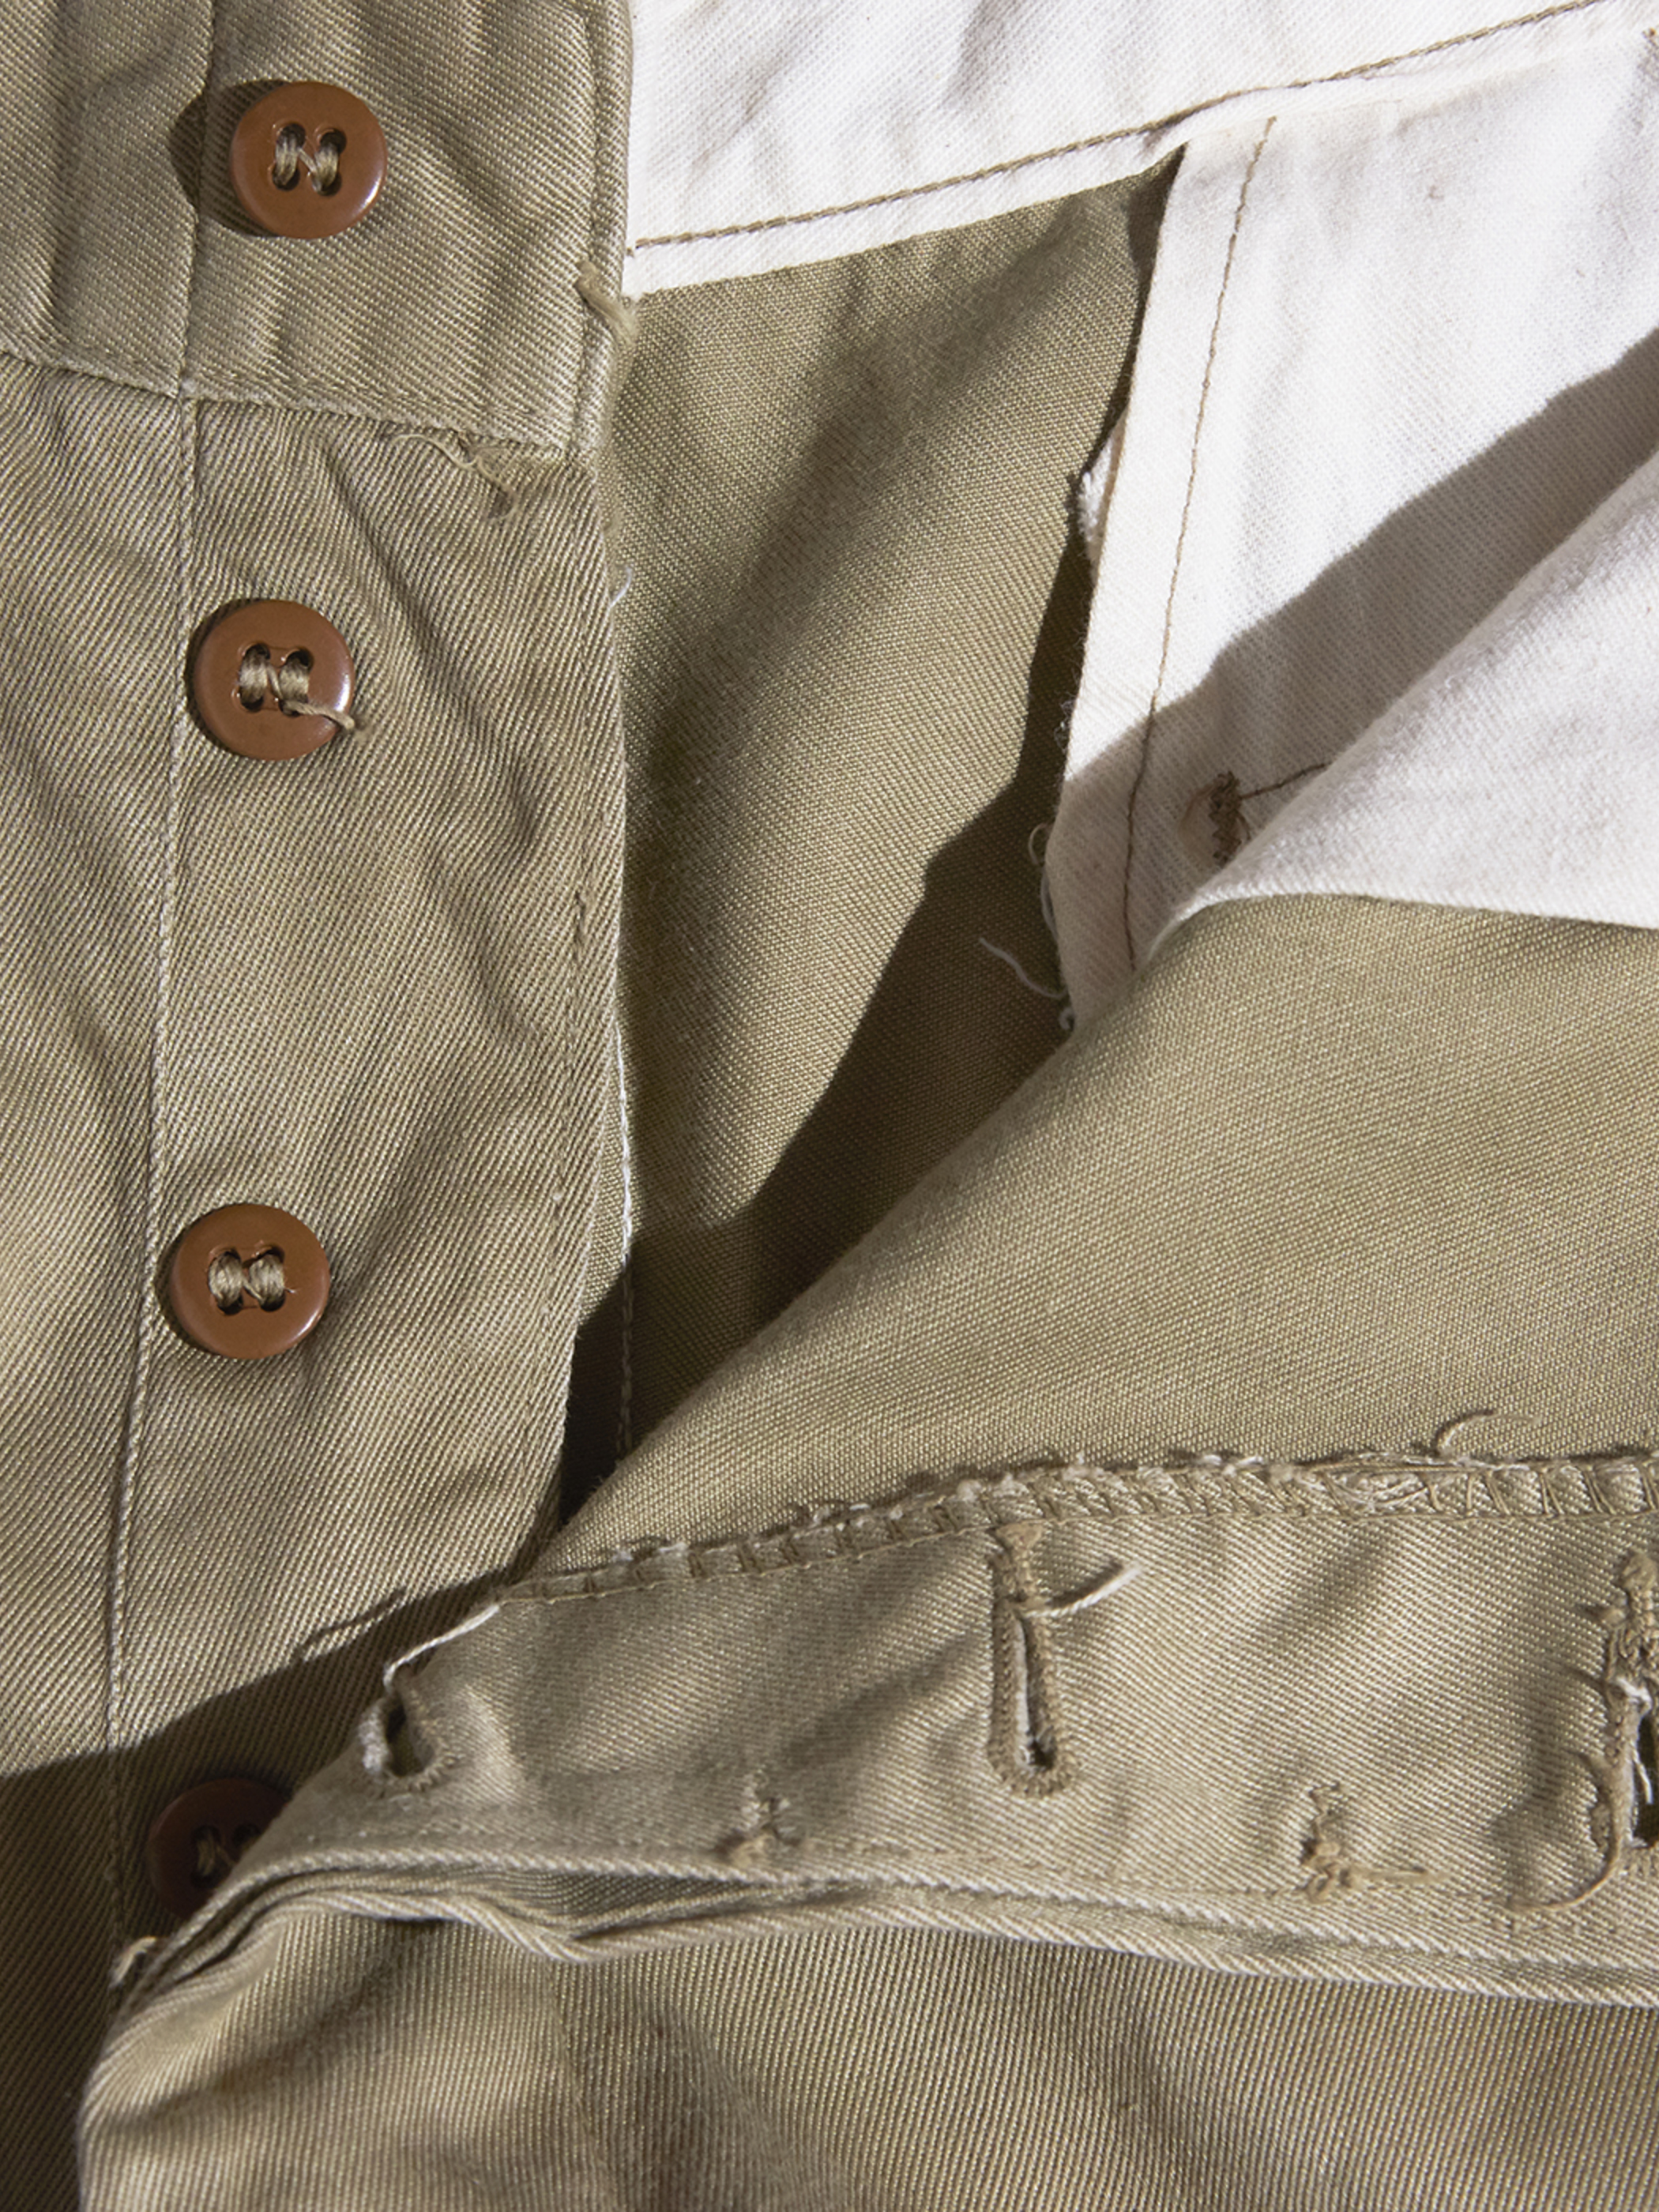 1960s "US ARMY" chino trousers -KAHKI-